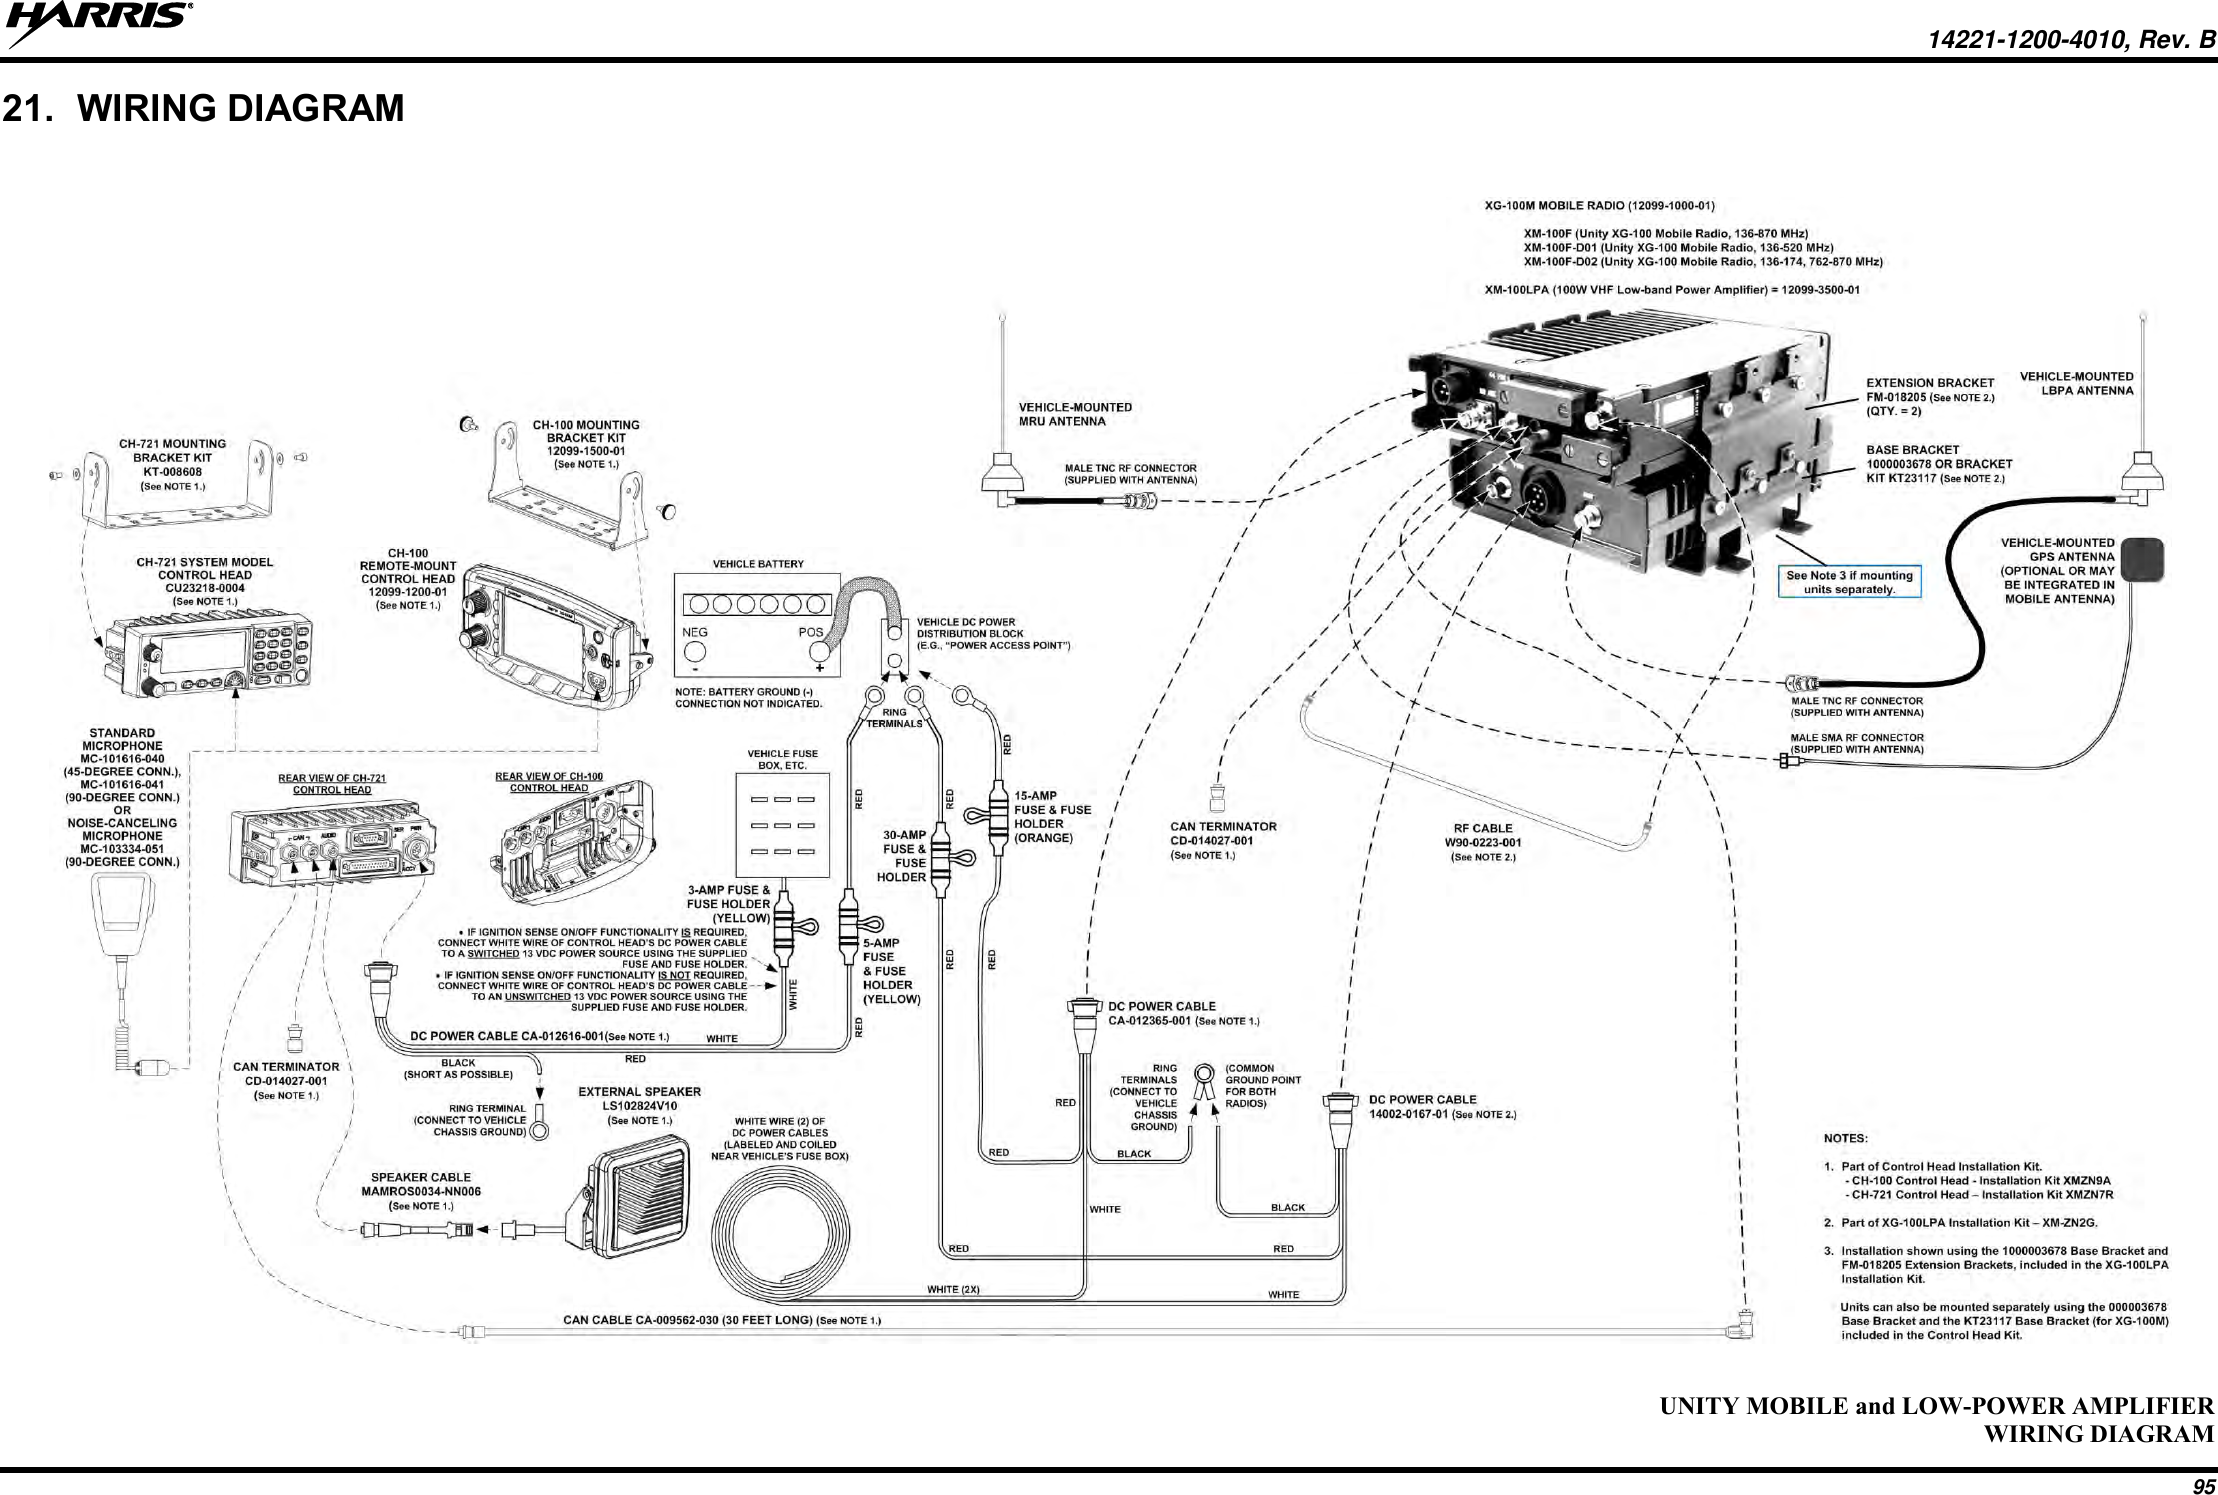   14221-1200-4010, Rev. B 95 21.  WIRING DIAGRAM  UNITY MOBILE and LOW-POWER AMPLIFIER WIRING DIAGRAM 